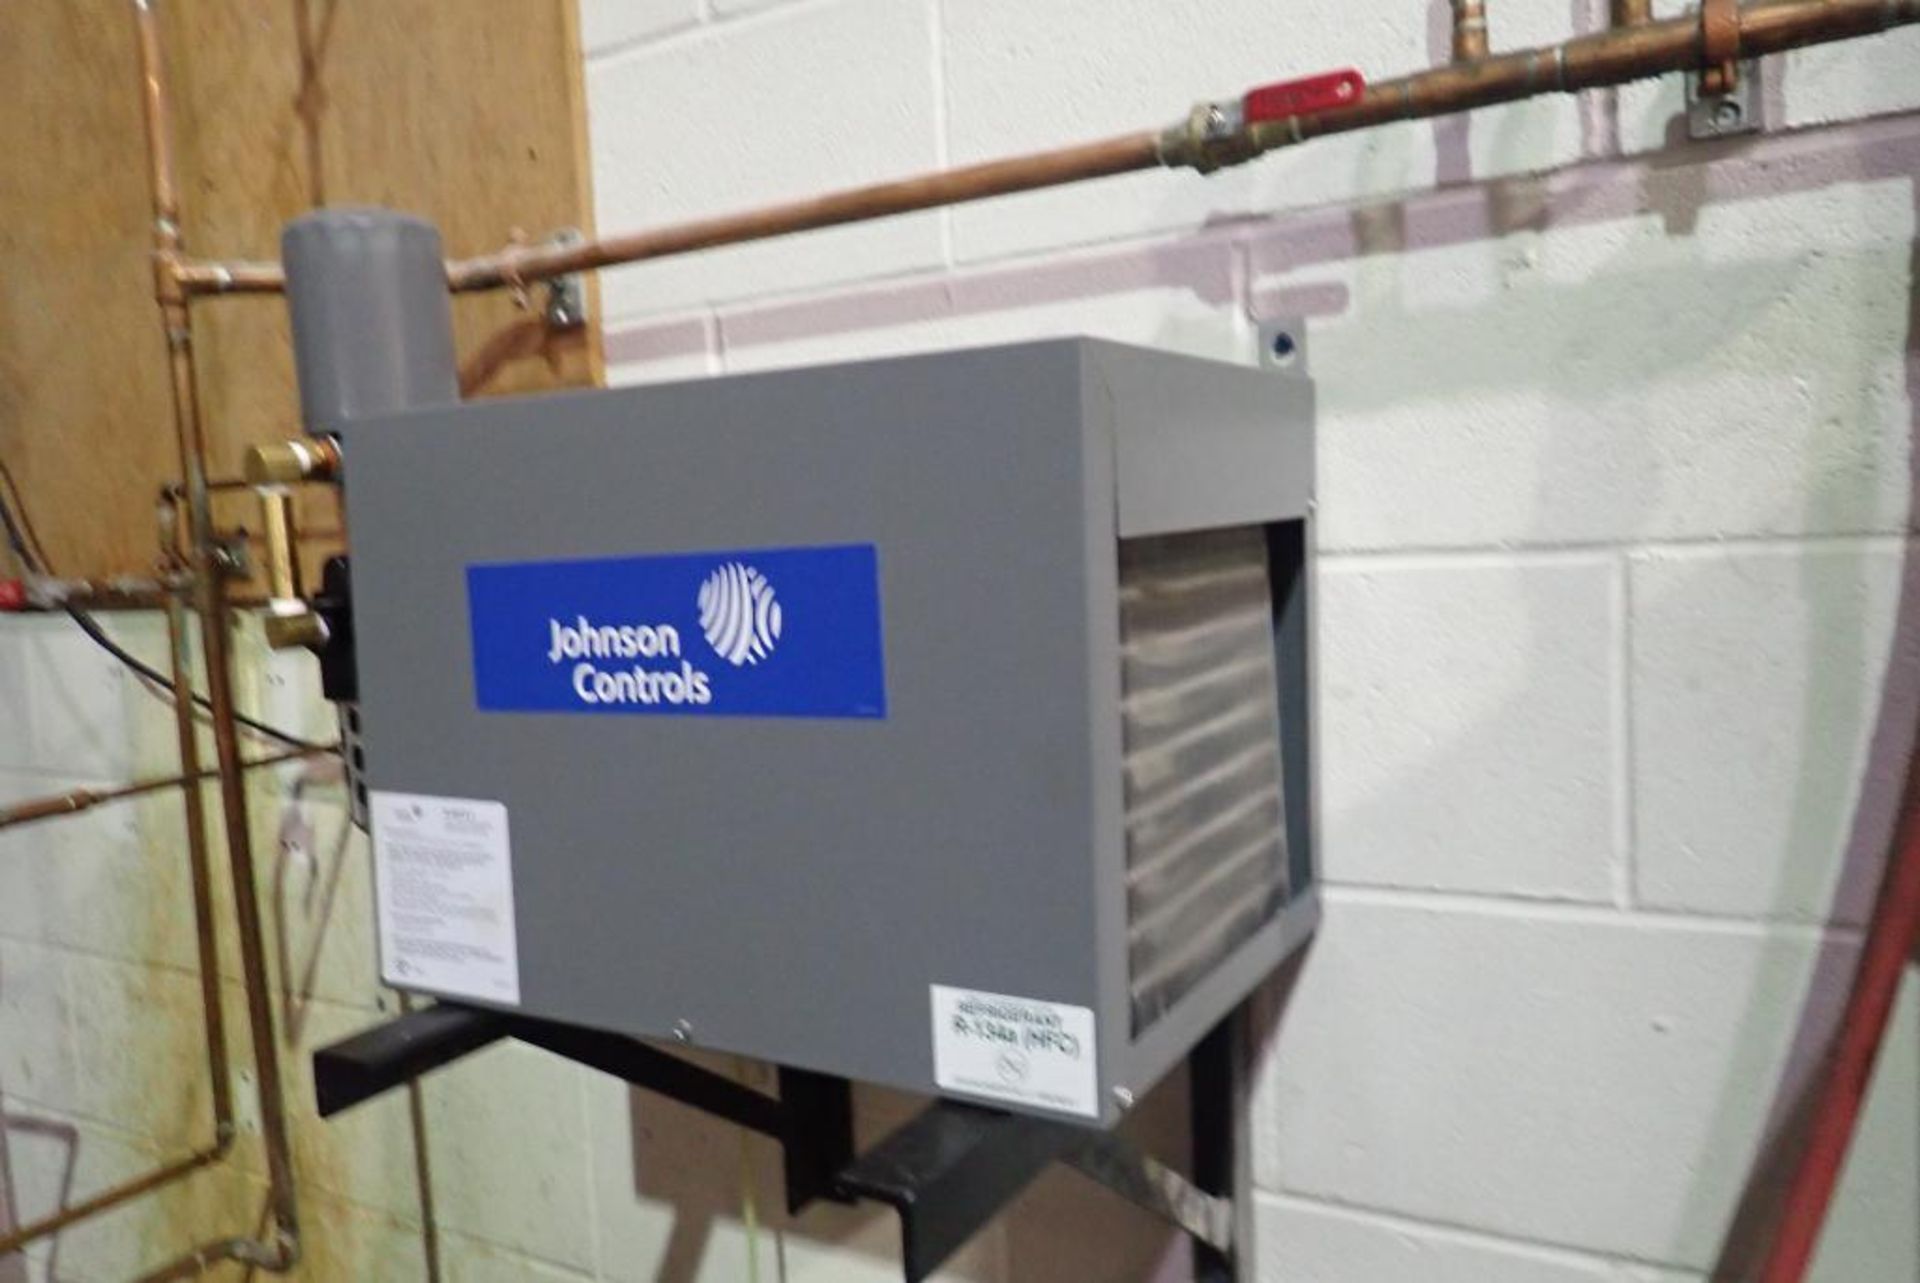 Princess Auto 5hp Vertical Twin Head Air Compressor w/Johnson Controls Dryer and DeVilbiss Dryer. - Image 2 of 3